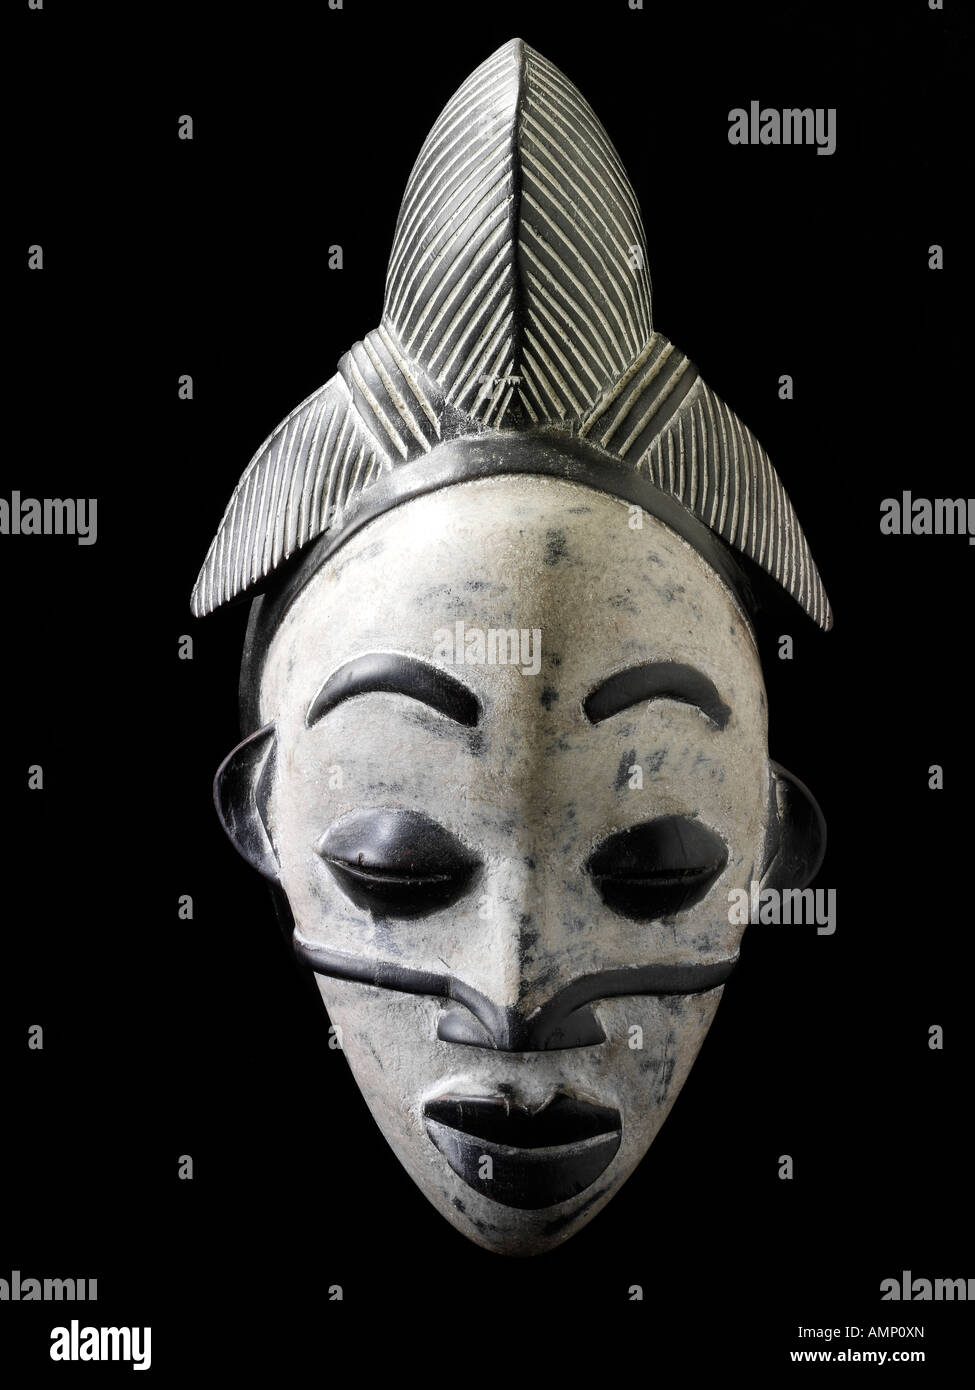 Ethnic traditional African mask. Art and craft. Stock Photo